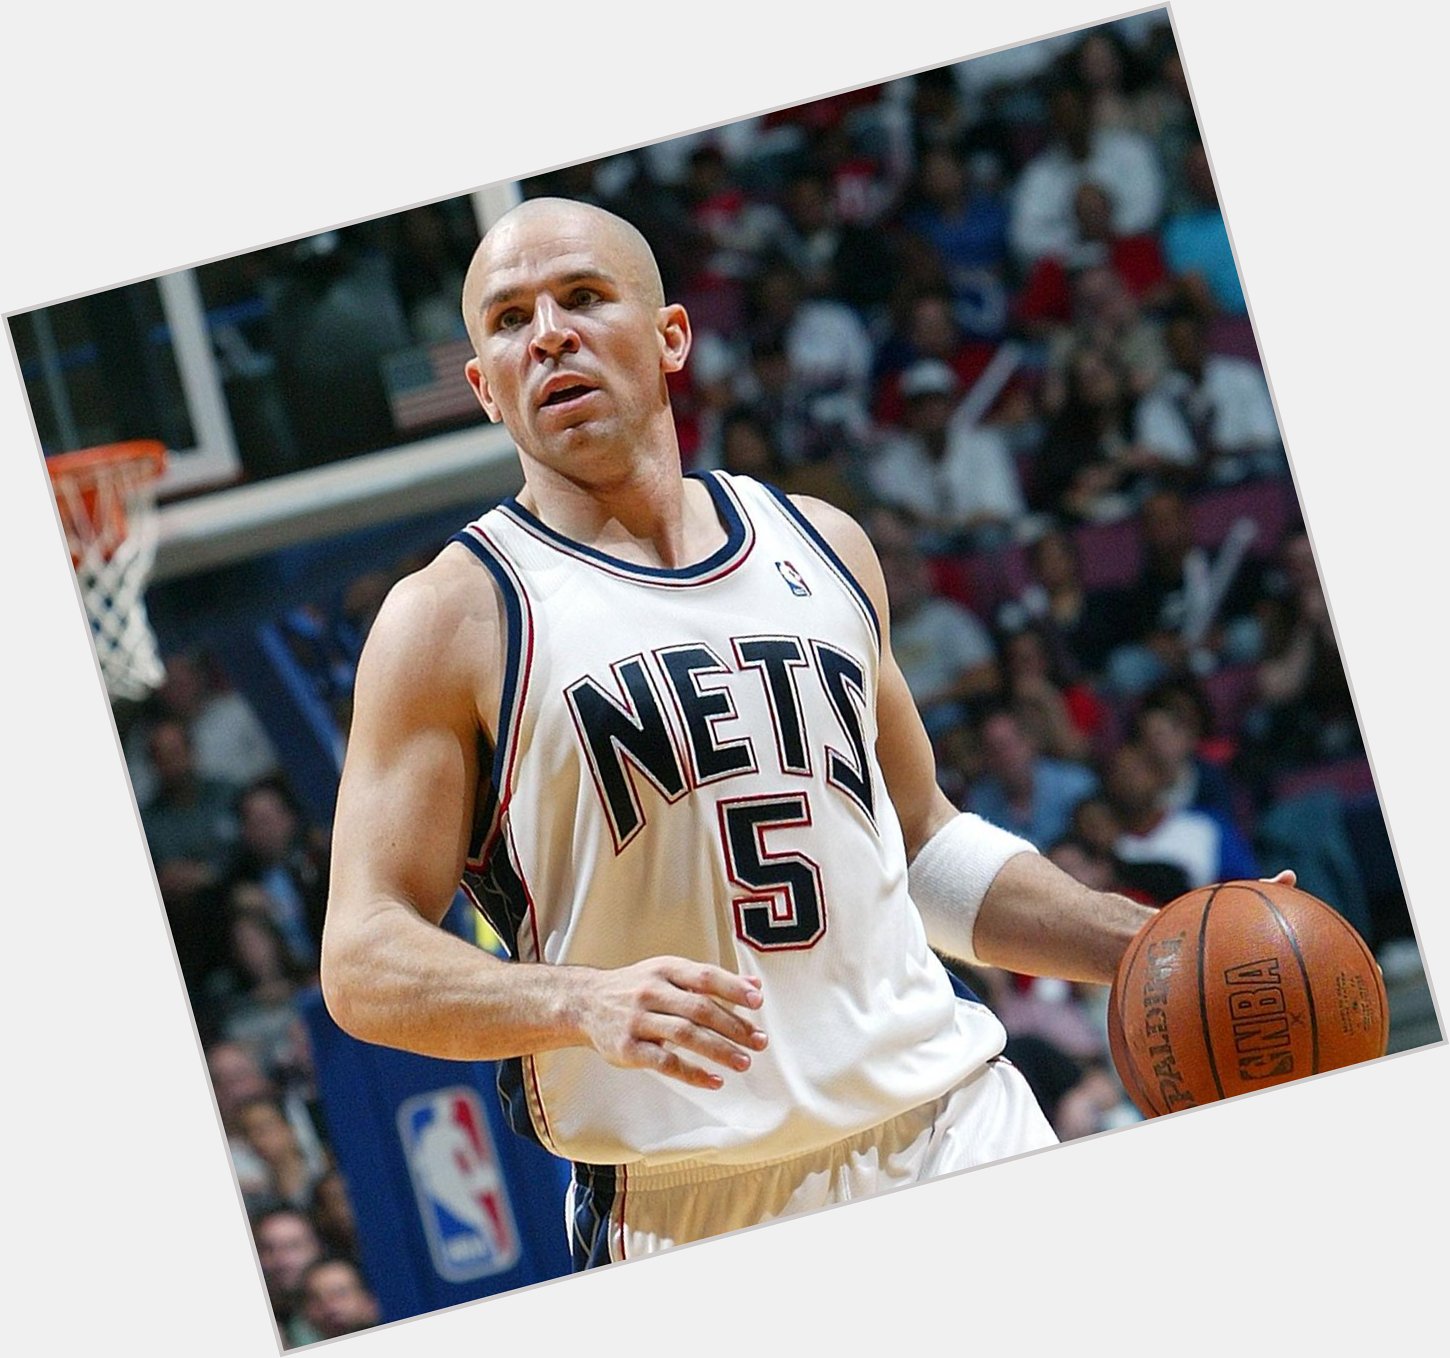 Happy 42nd birthday to 10-time all-star, current head coach Jason Kidd! 